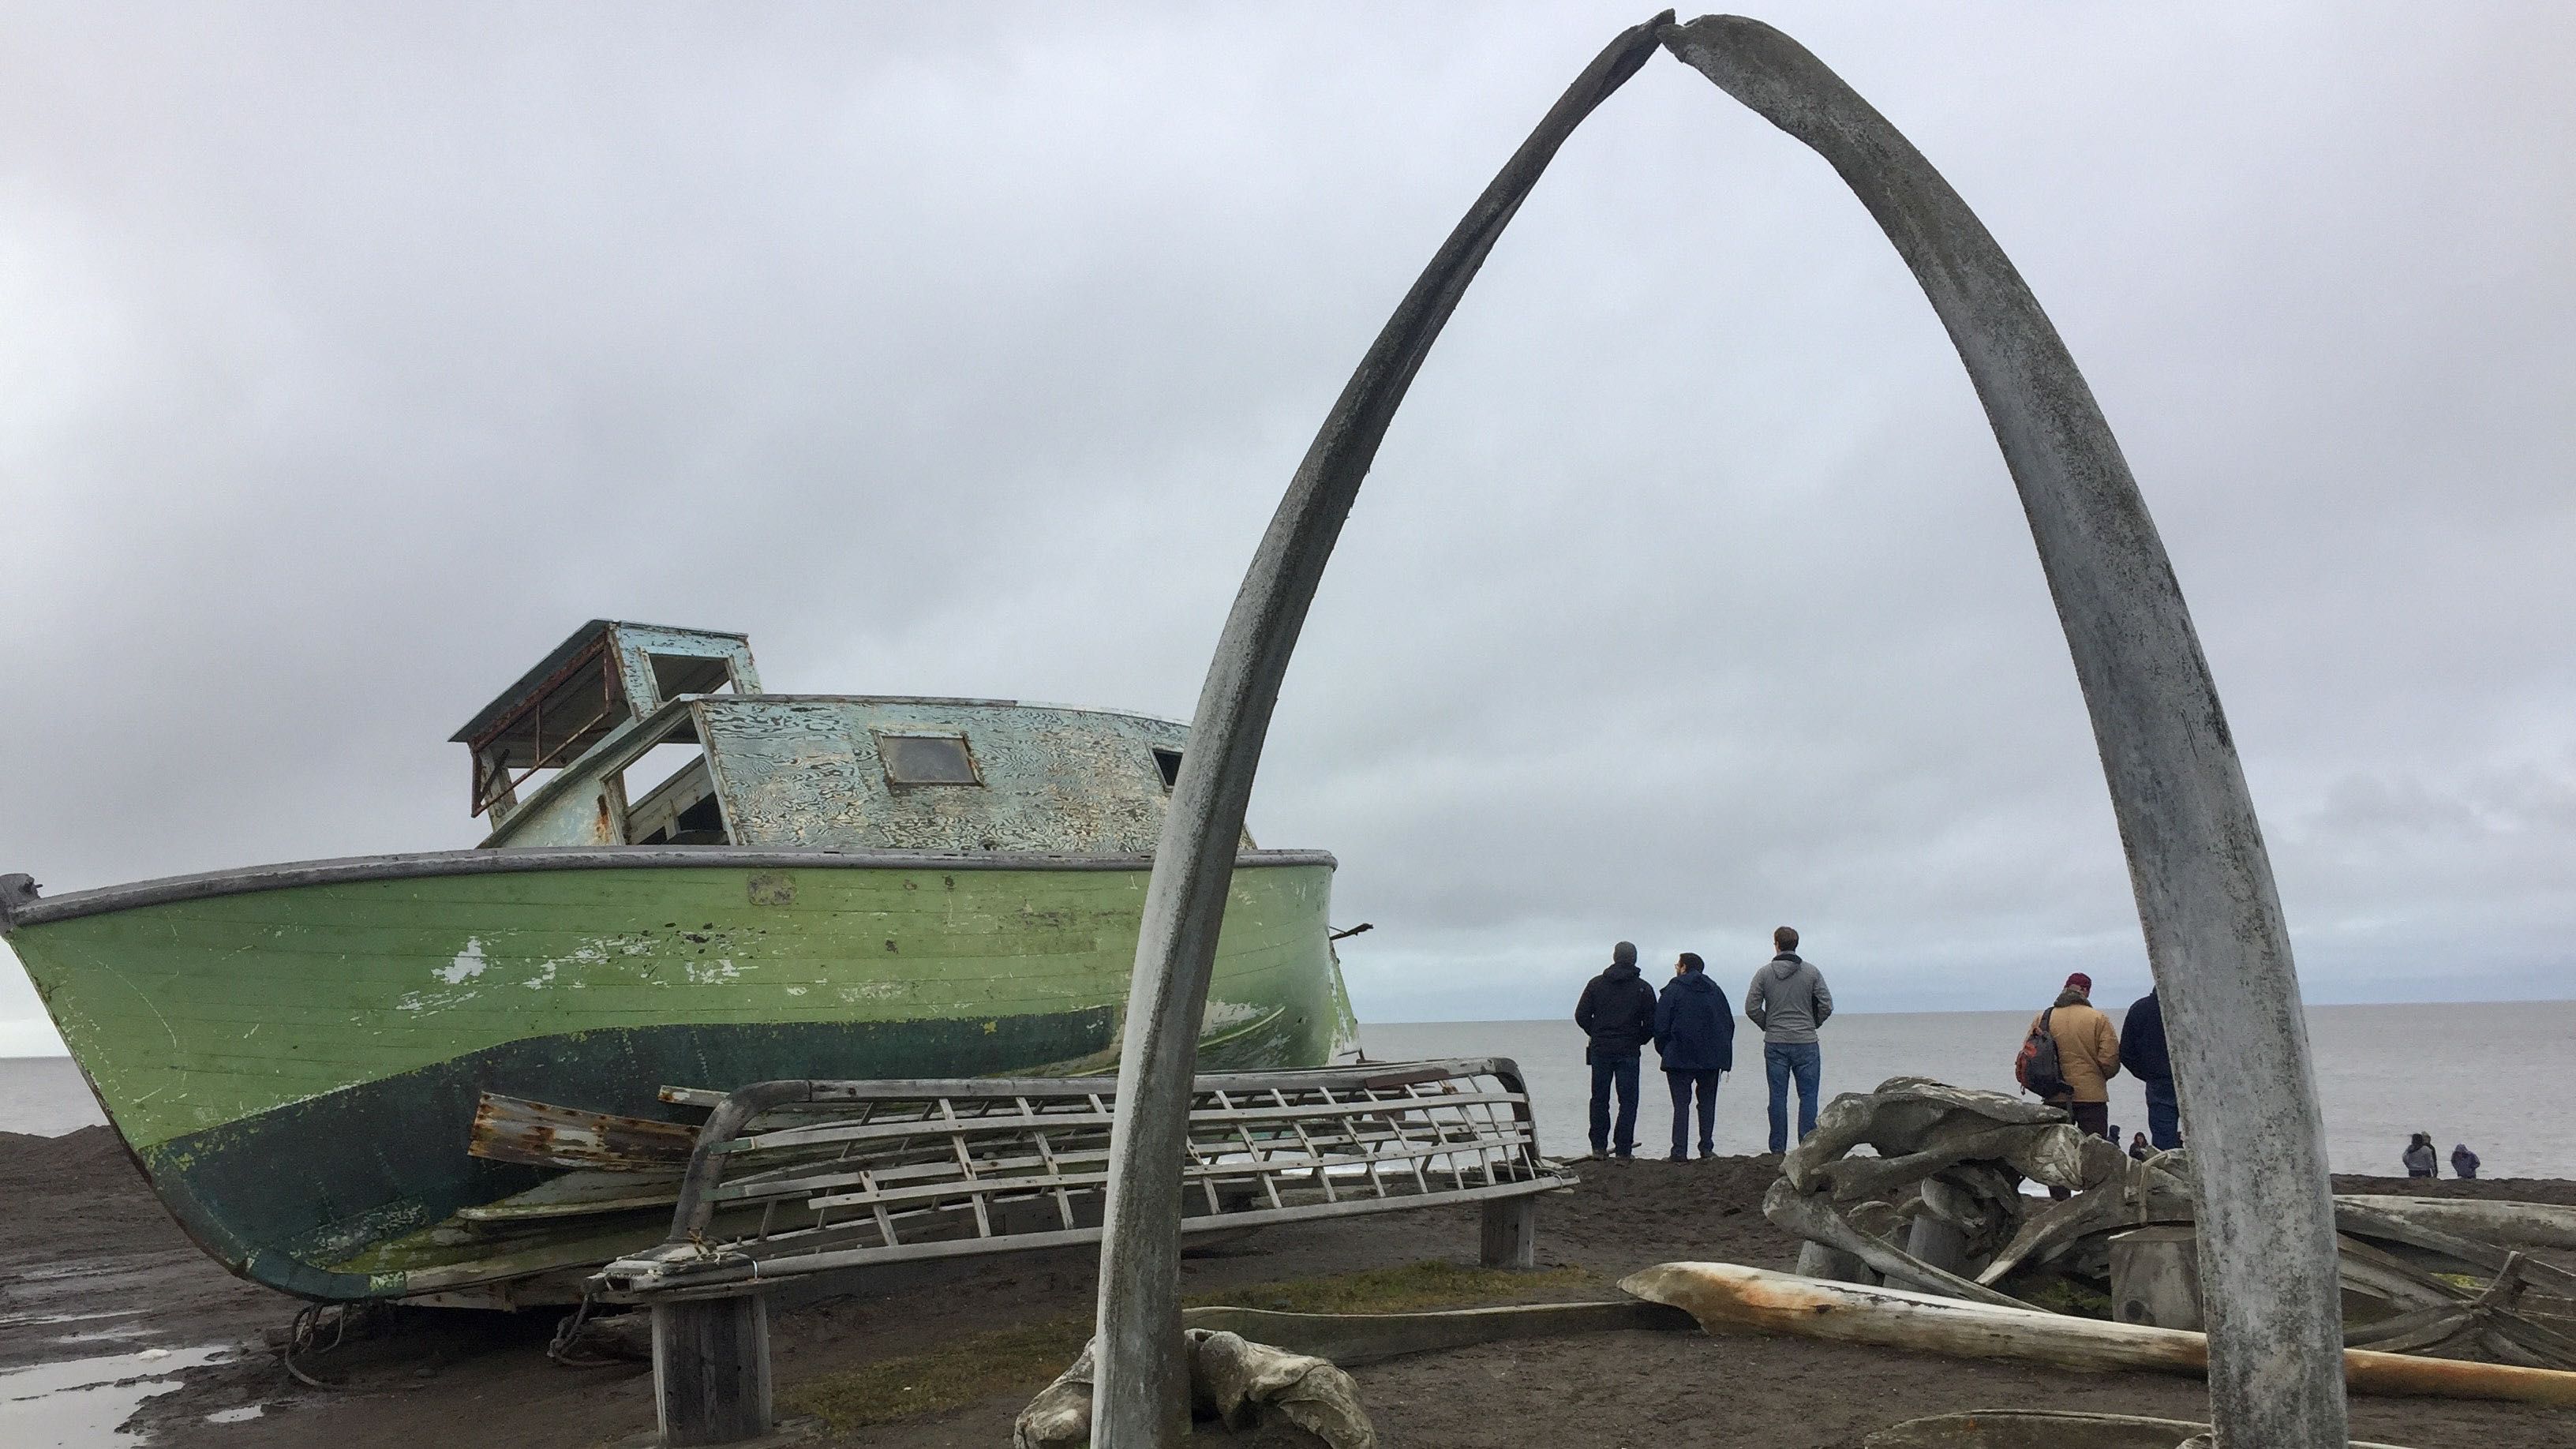 Bowhead whale bones form an arch on the beach near in the Iñupiaq community of Utqiagvik, Alaska, once known as Barrow. Whales have been a crucial food source along the harsh and isolated Arctic coast for millenia. Image by Amy Martin. Alaska, 2018.